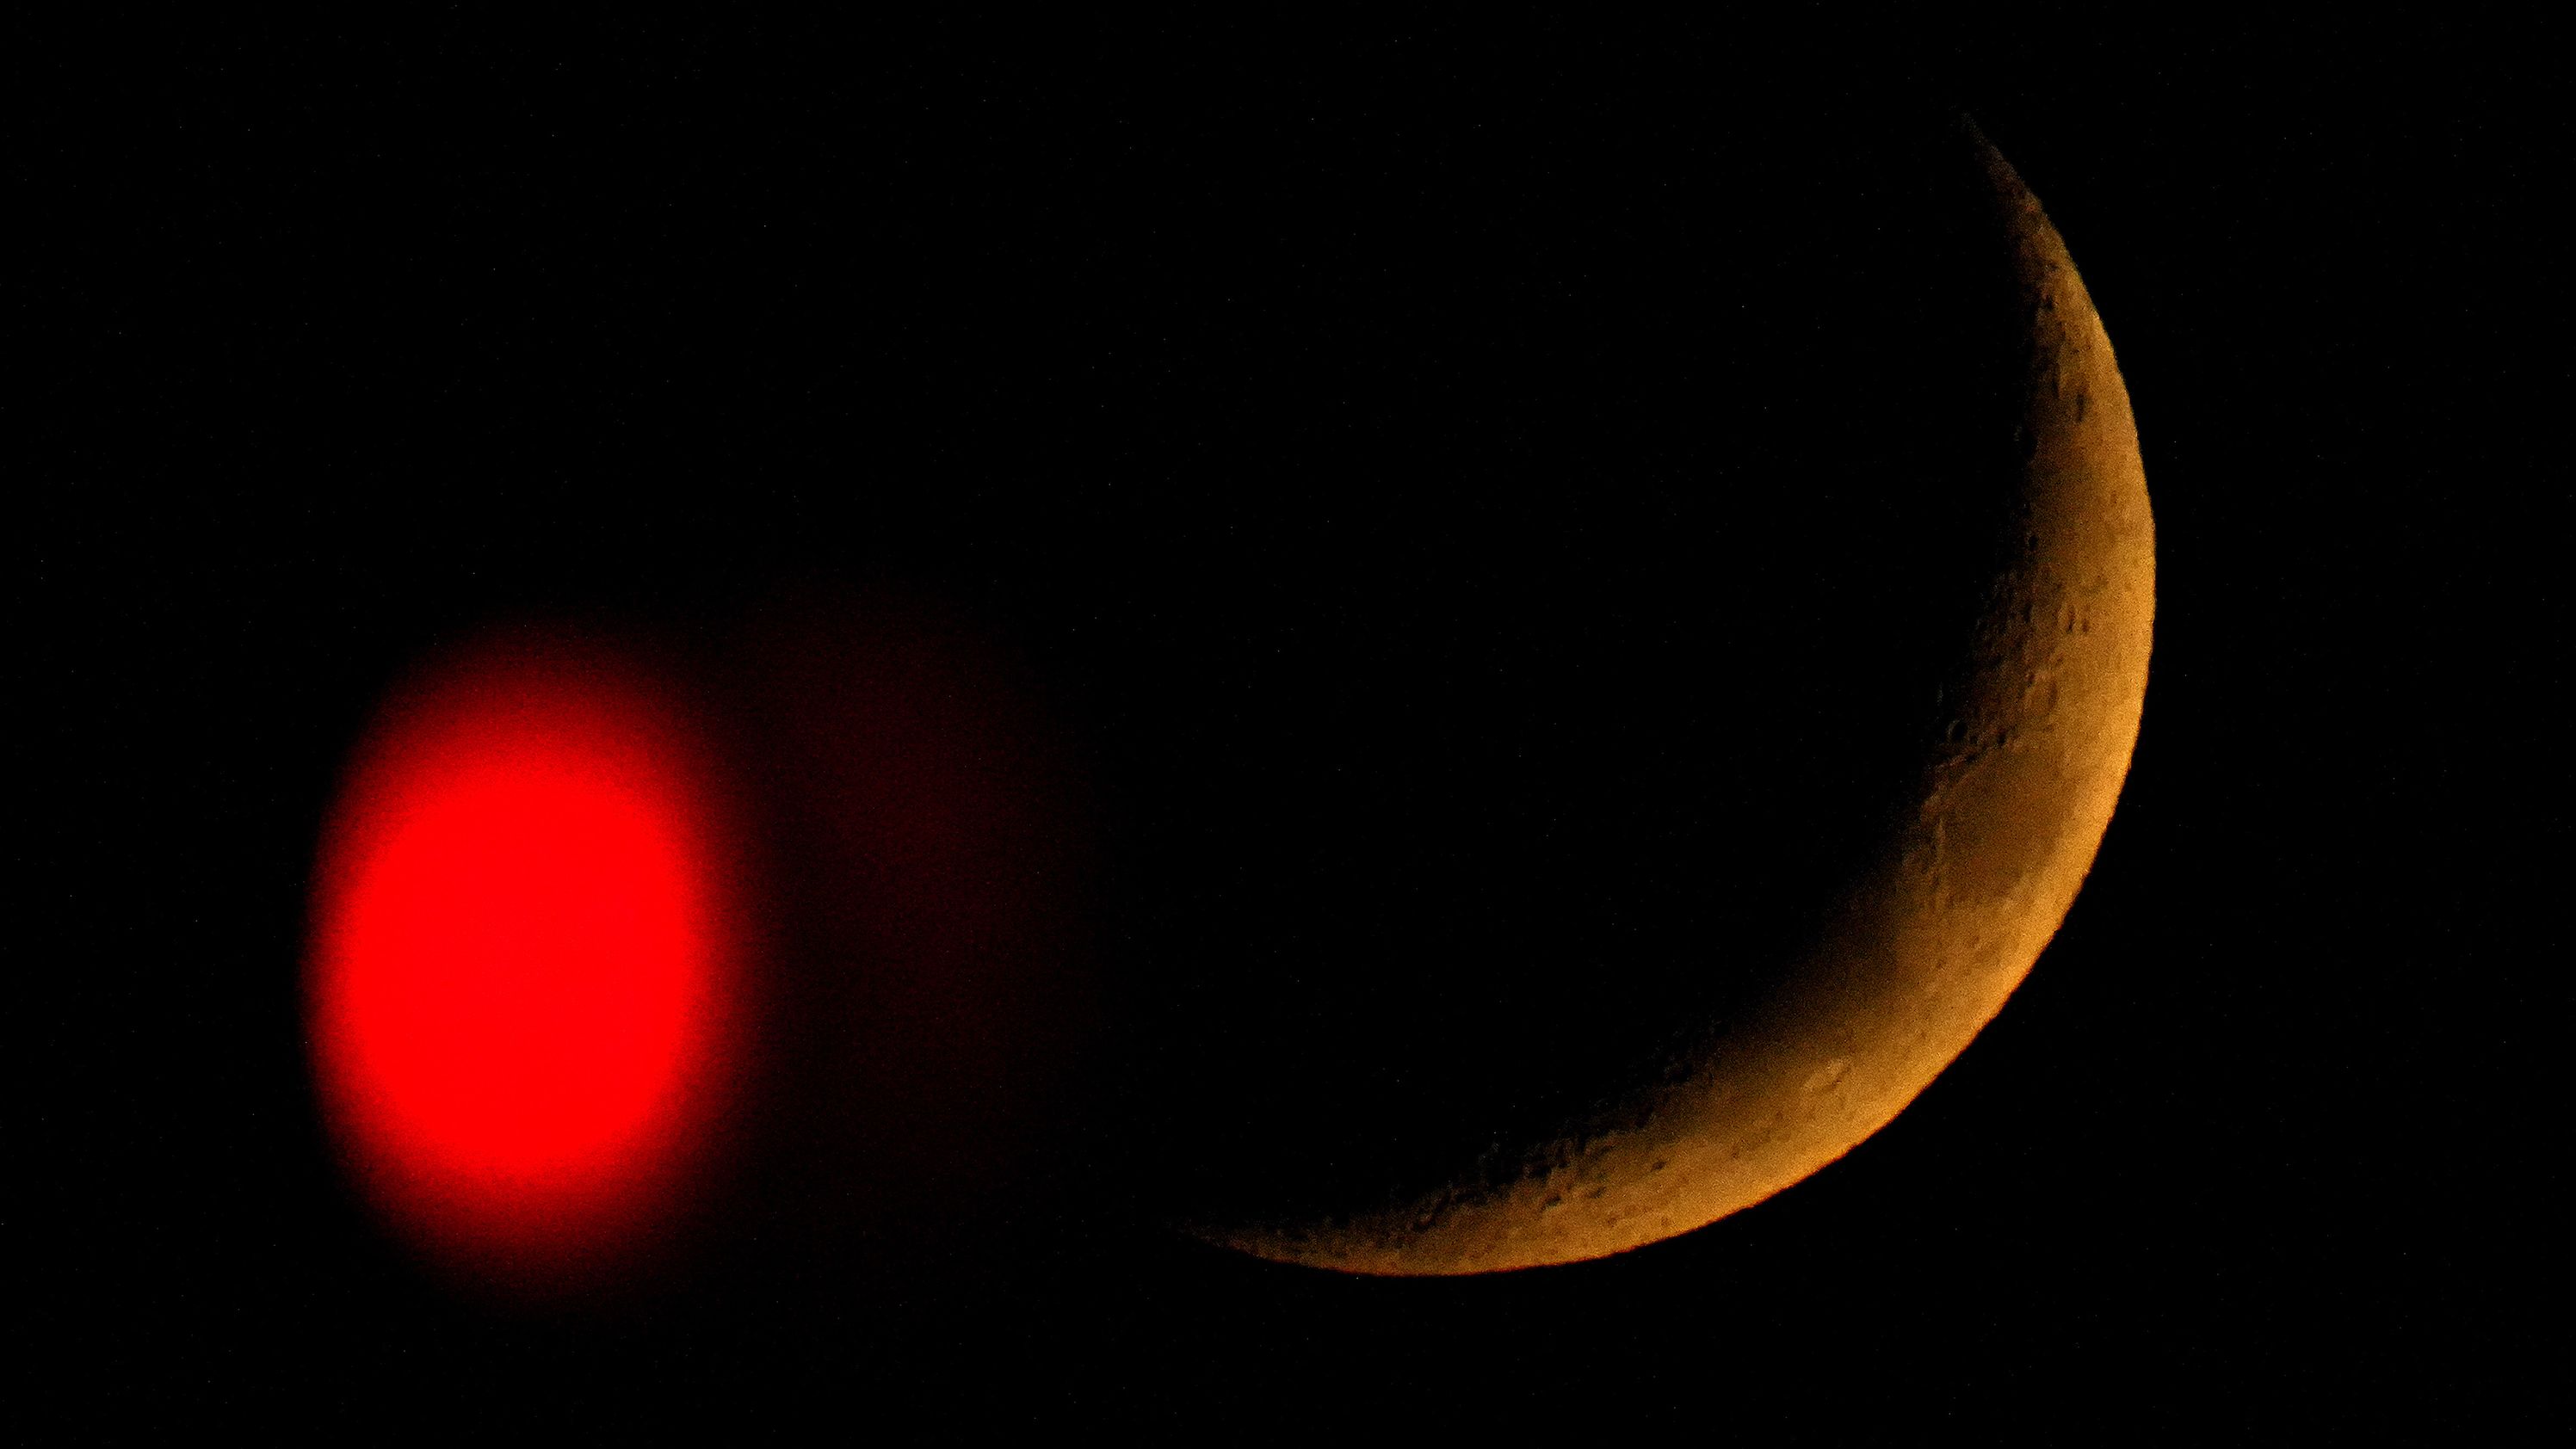 The crescent moon sets behind a stop light in Overland Park, Kansas, on Friday, October, 28.